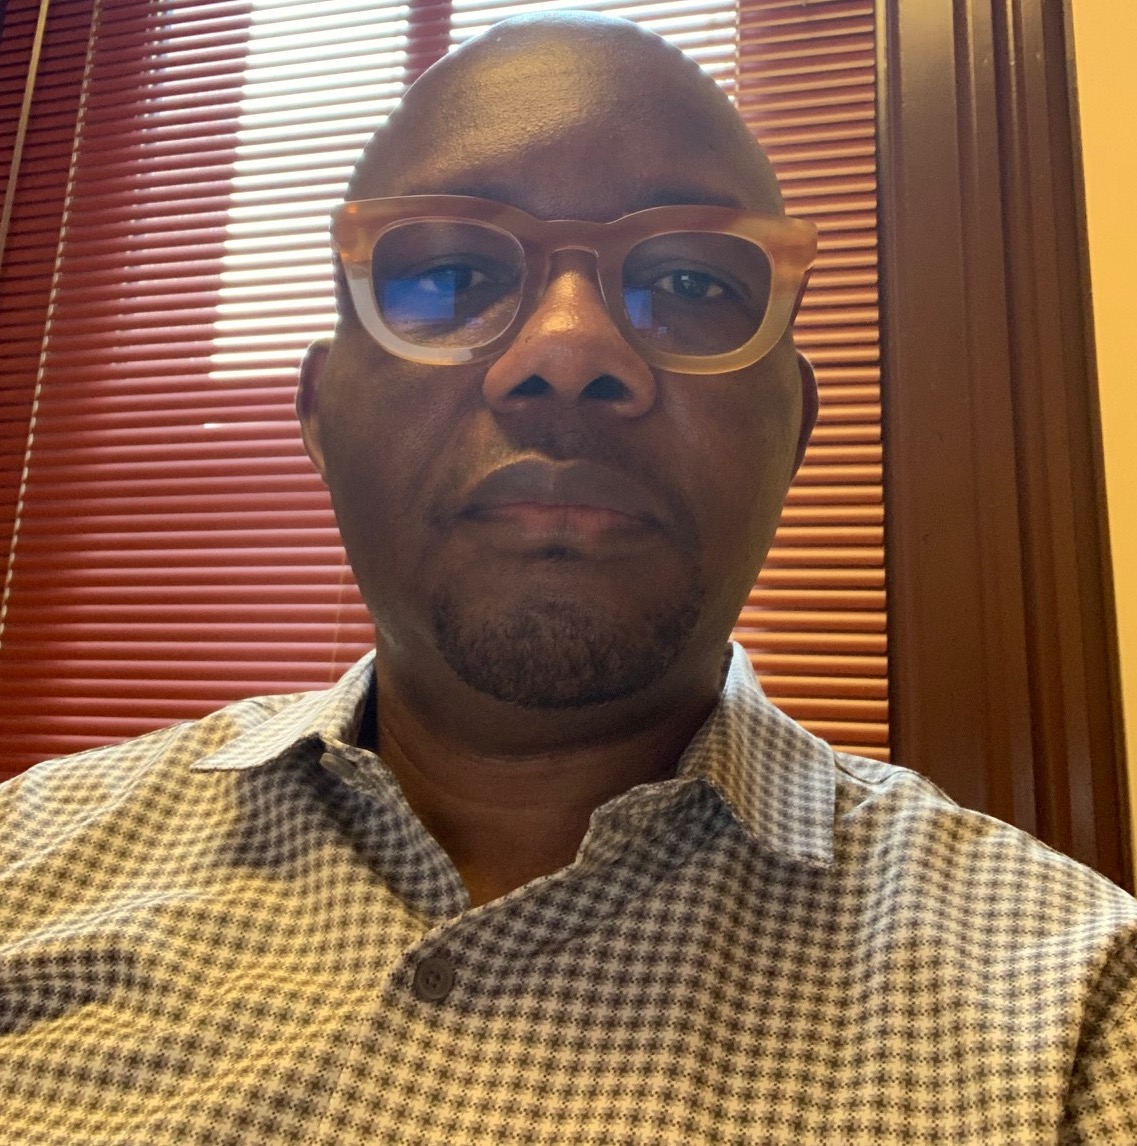 A Black man with glasses and a checkered shirt looks at the camera